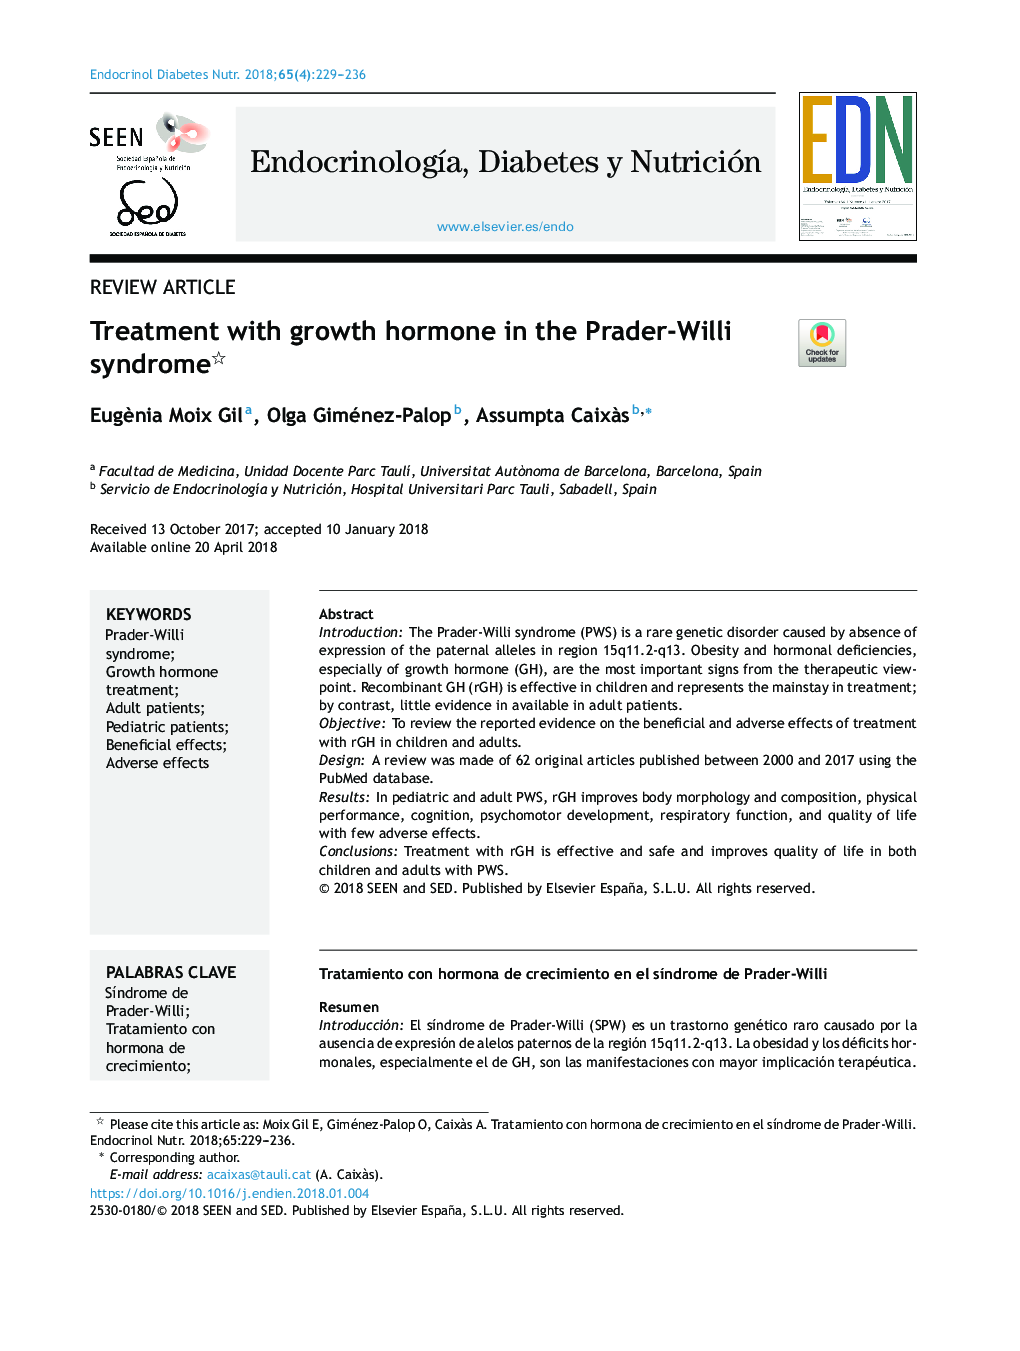 Treatment with growth hormone in the Prader-Willi syndrome